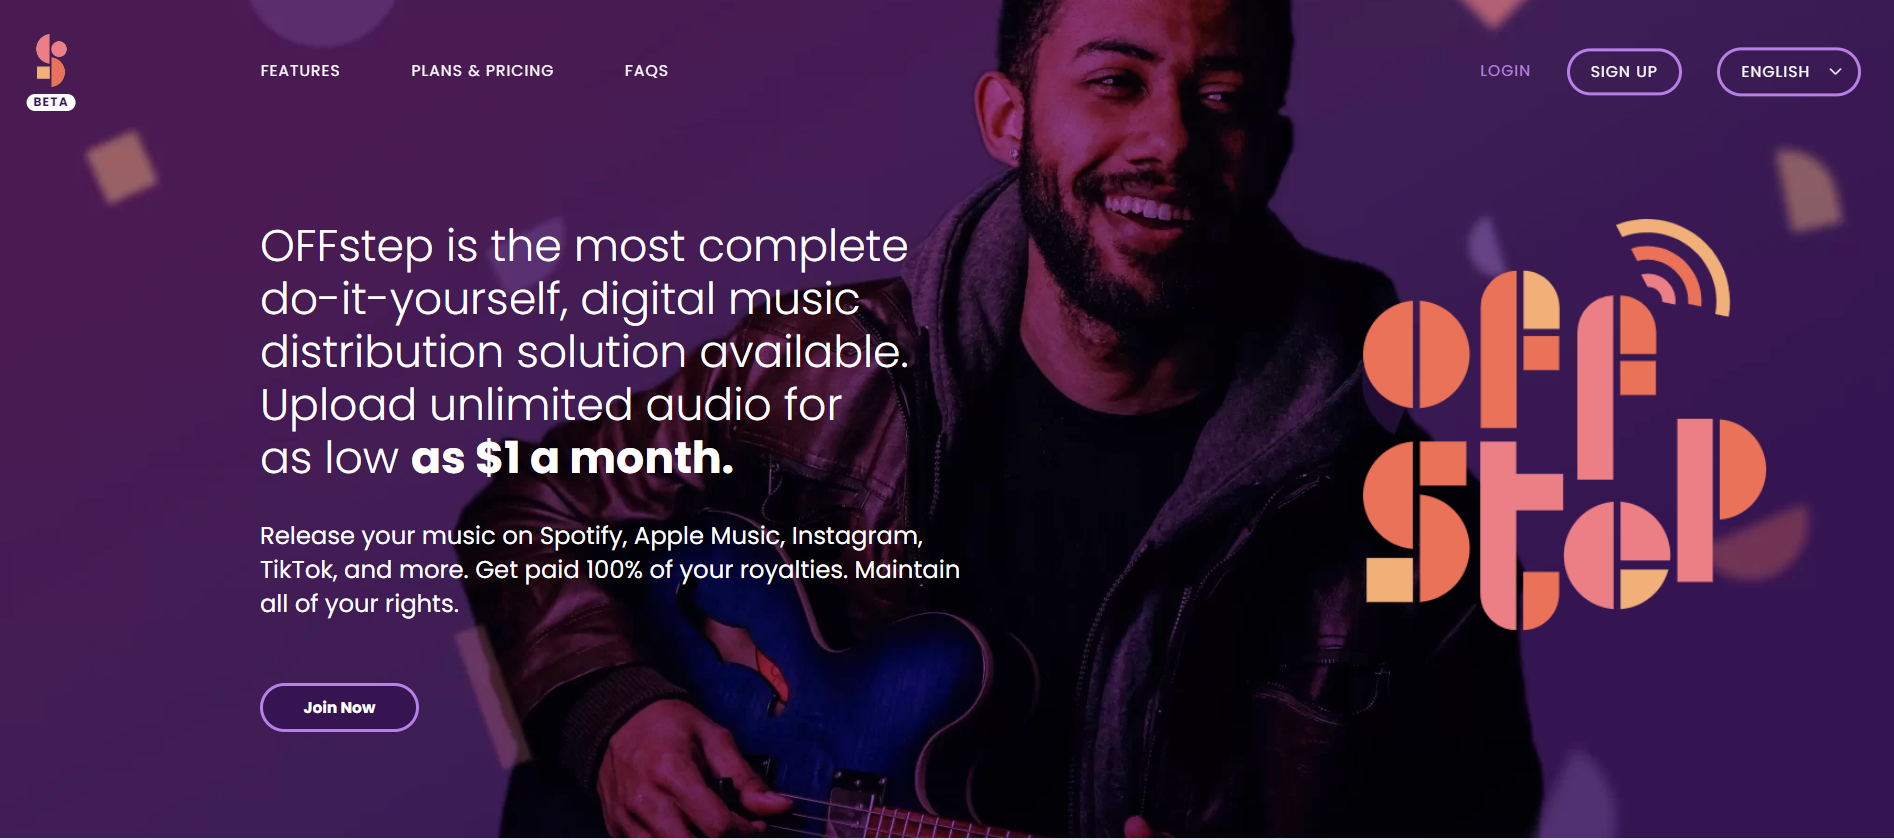 OFFstep is the most complete do-it-yourself, digital music distribution solution available. Upload unlimited audio for as low as $1 a month.